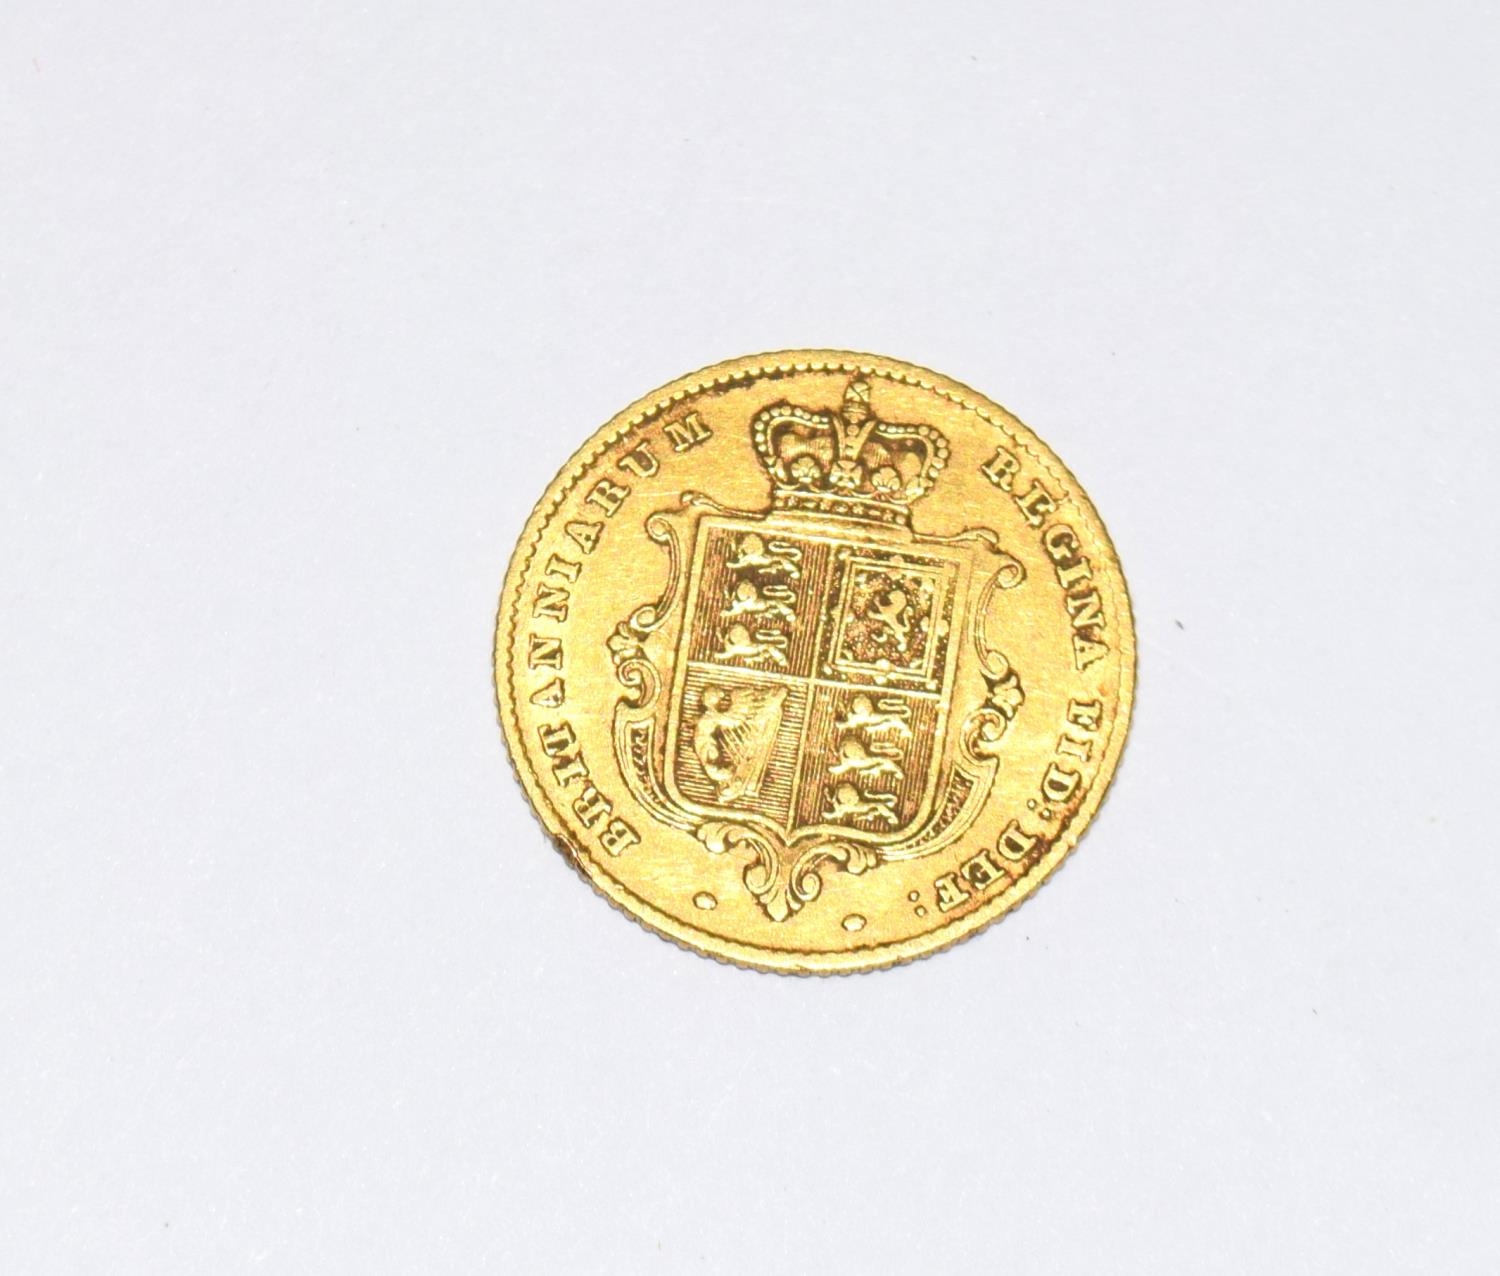 Victorian 1844 1/2 sovereign - Image 3 of 3